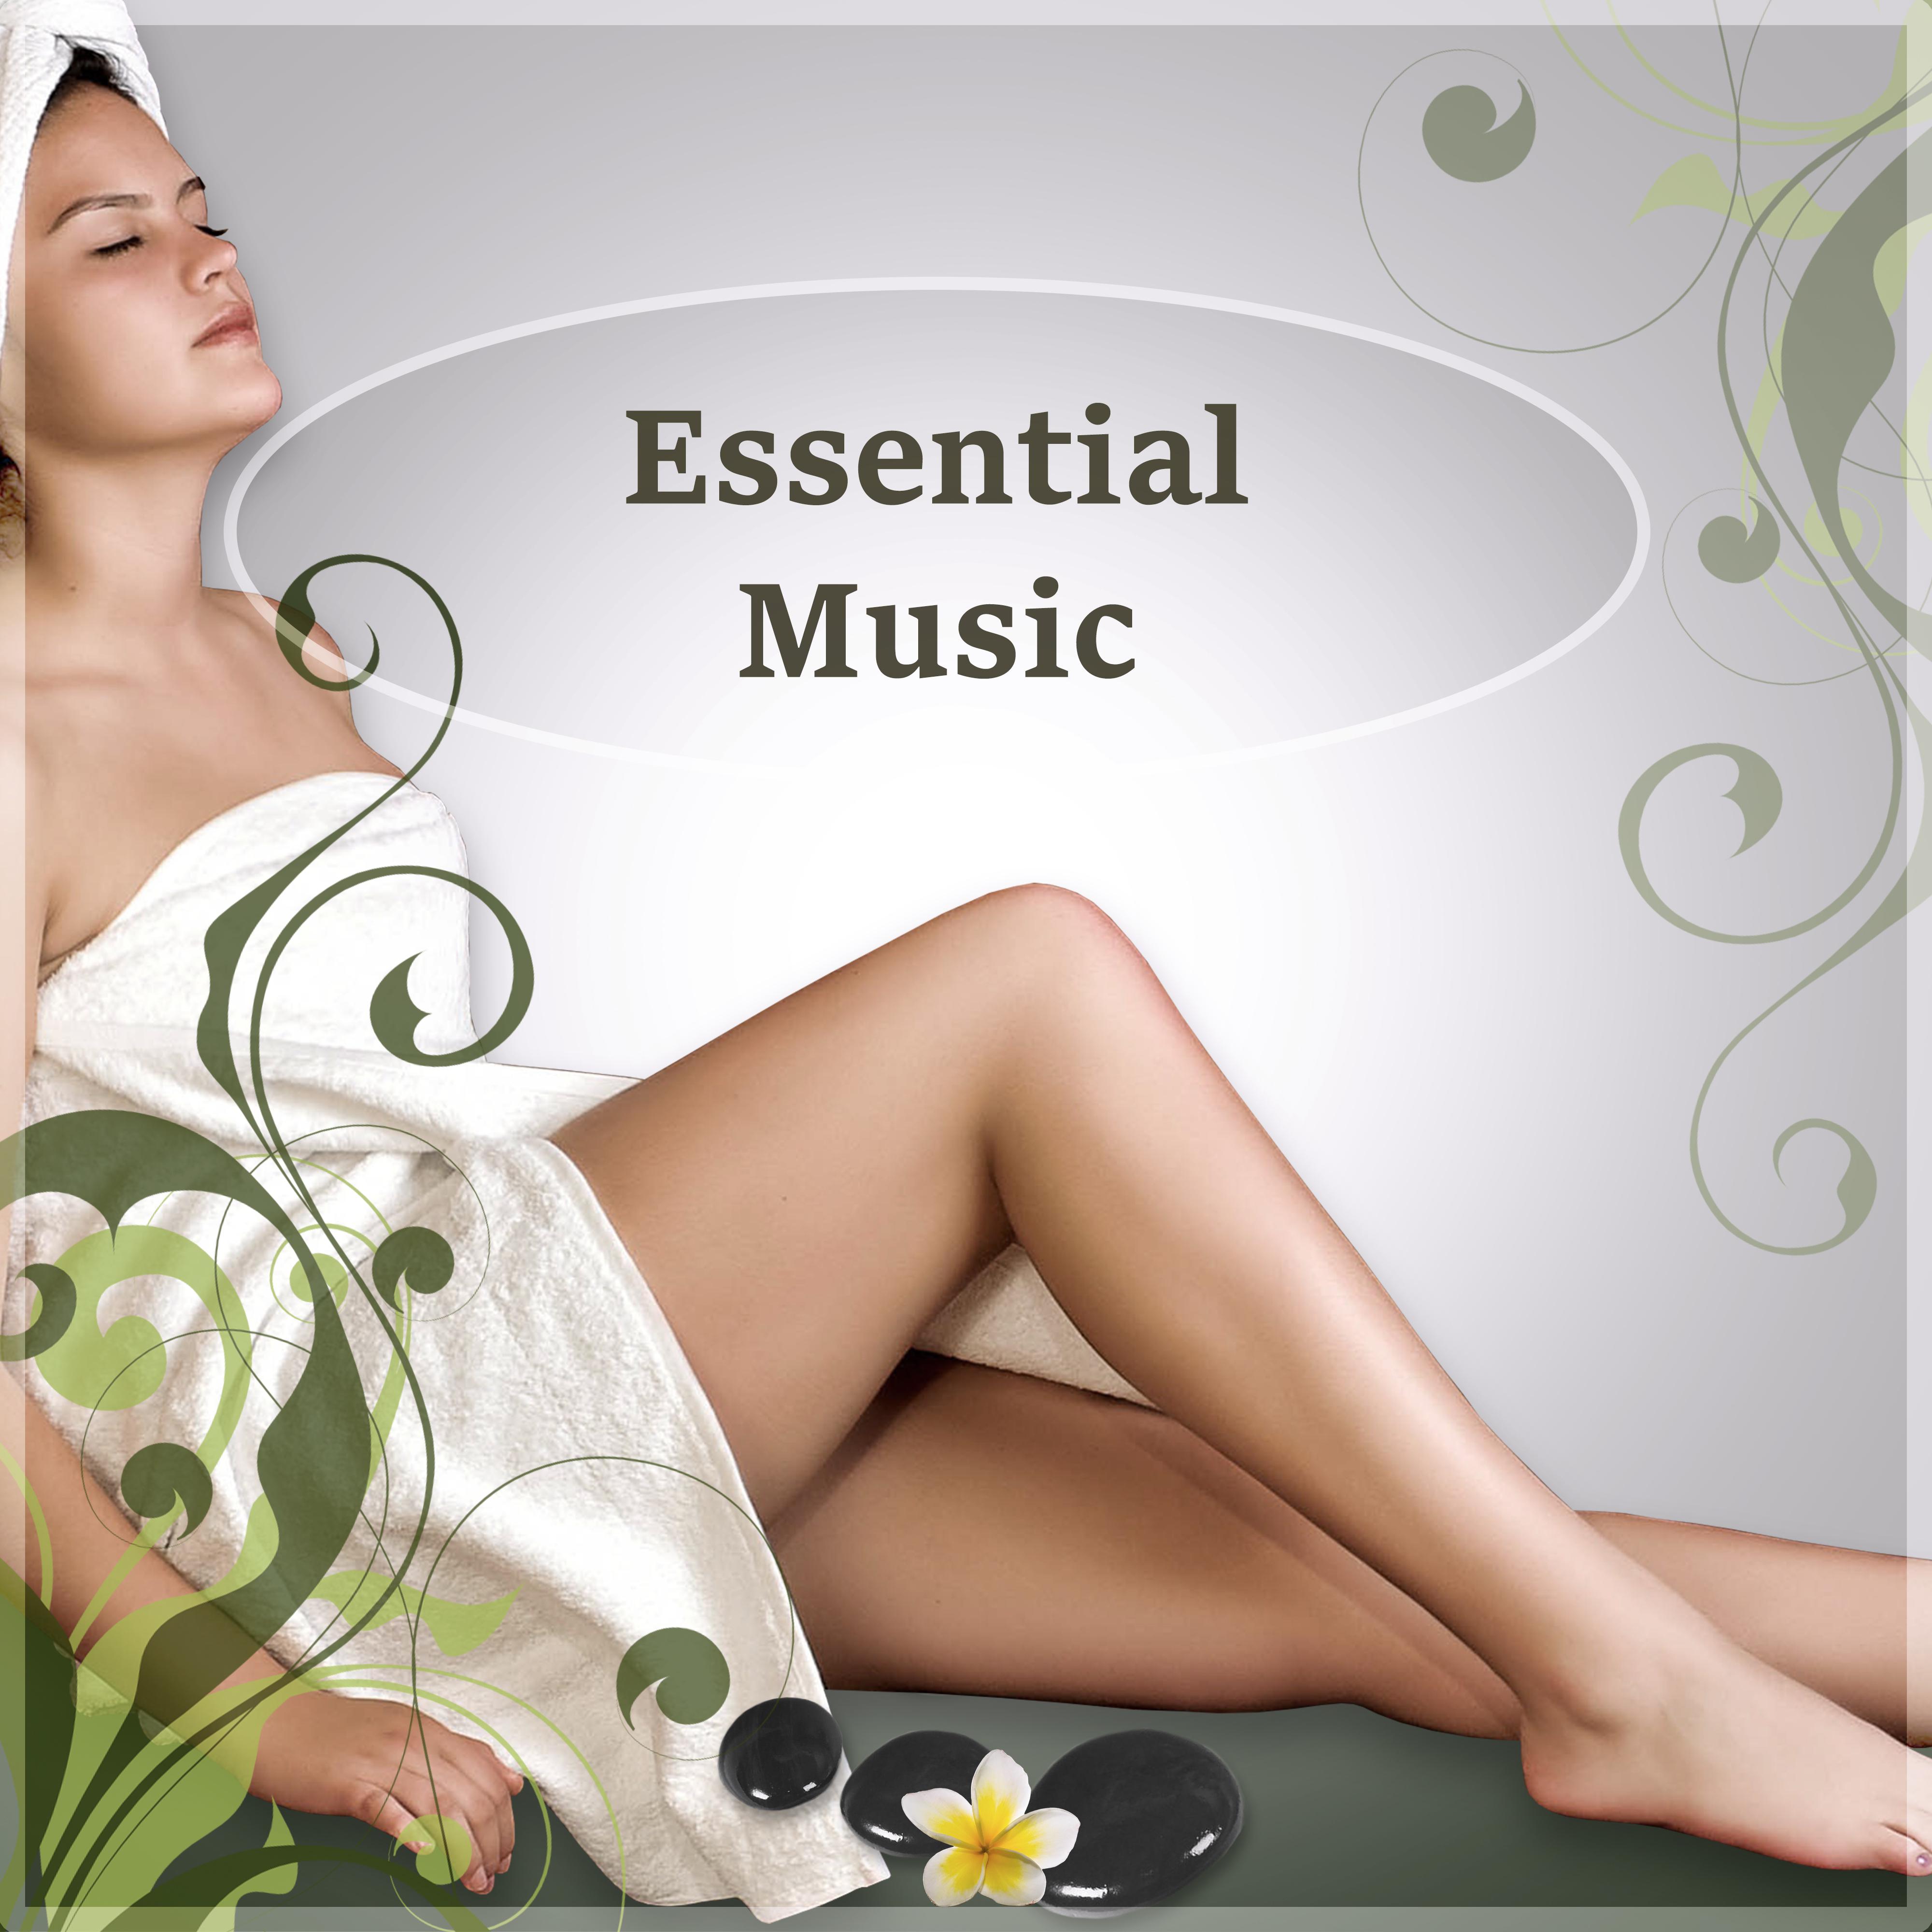 Healing Music for Spa